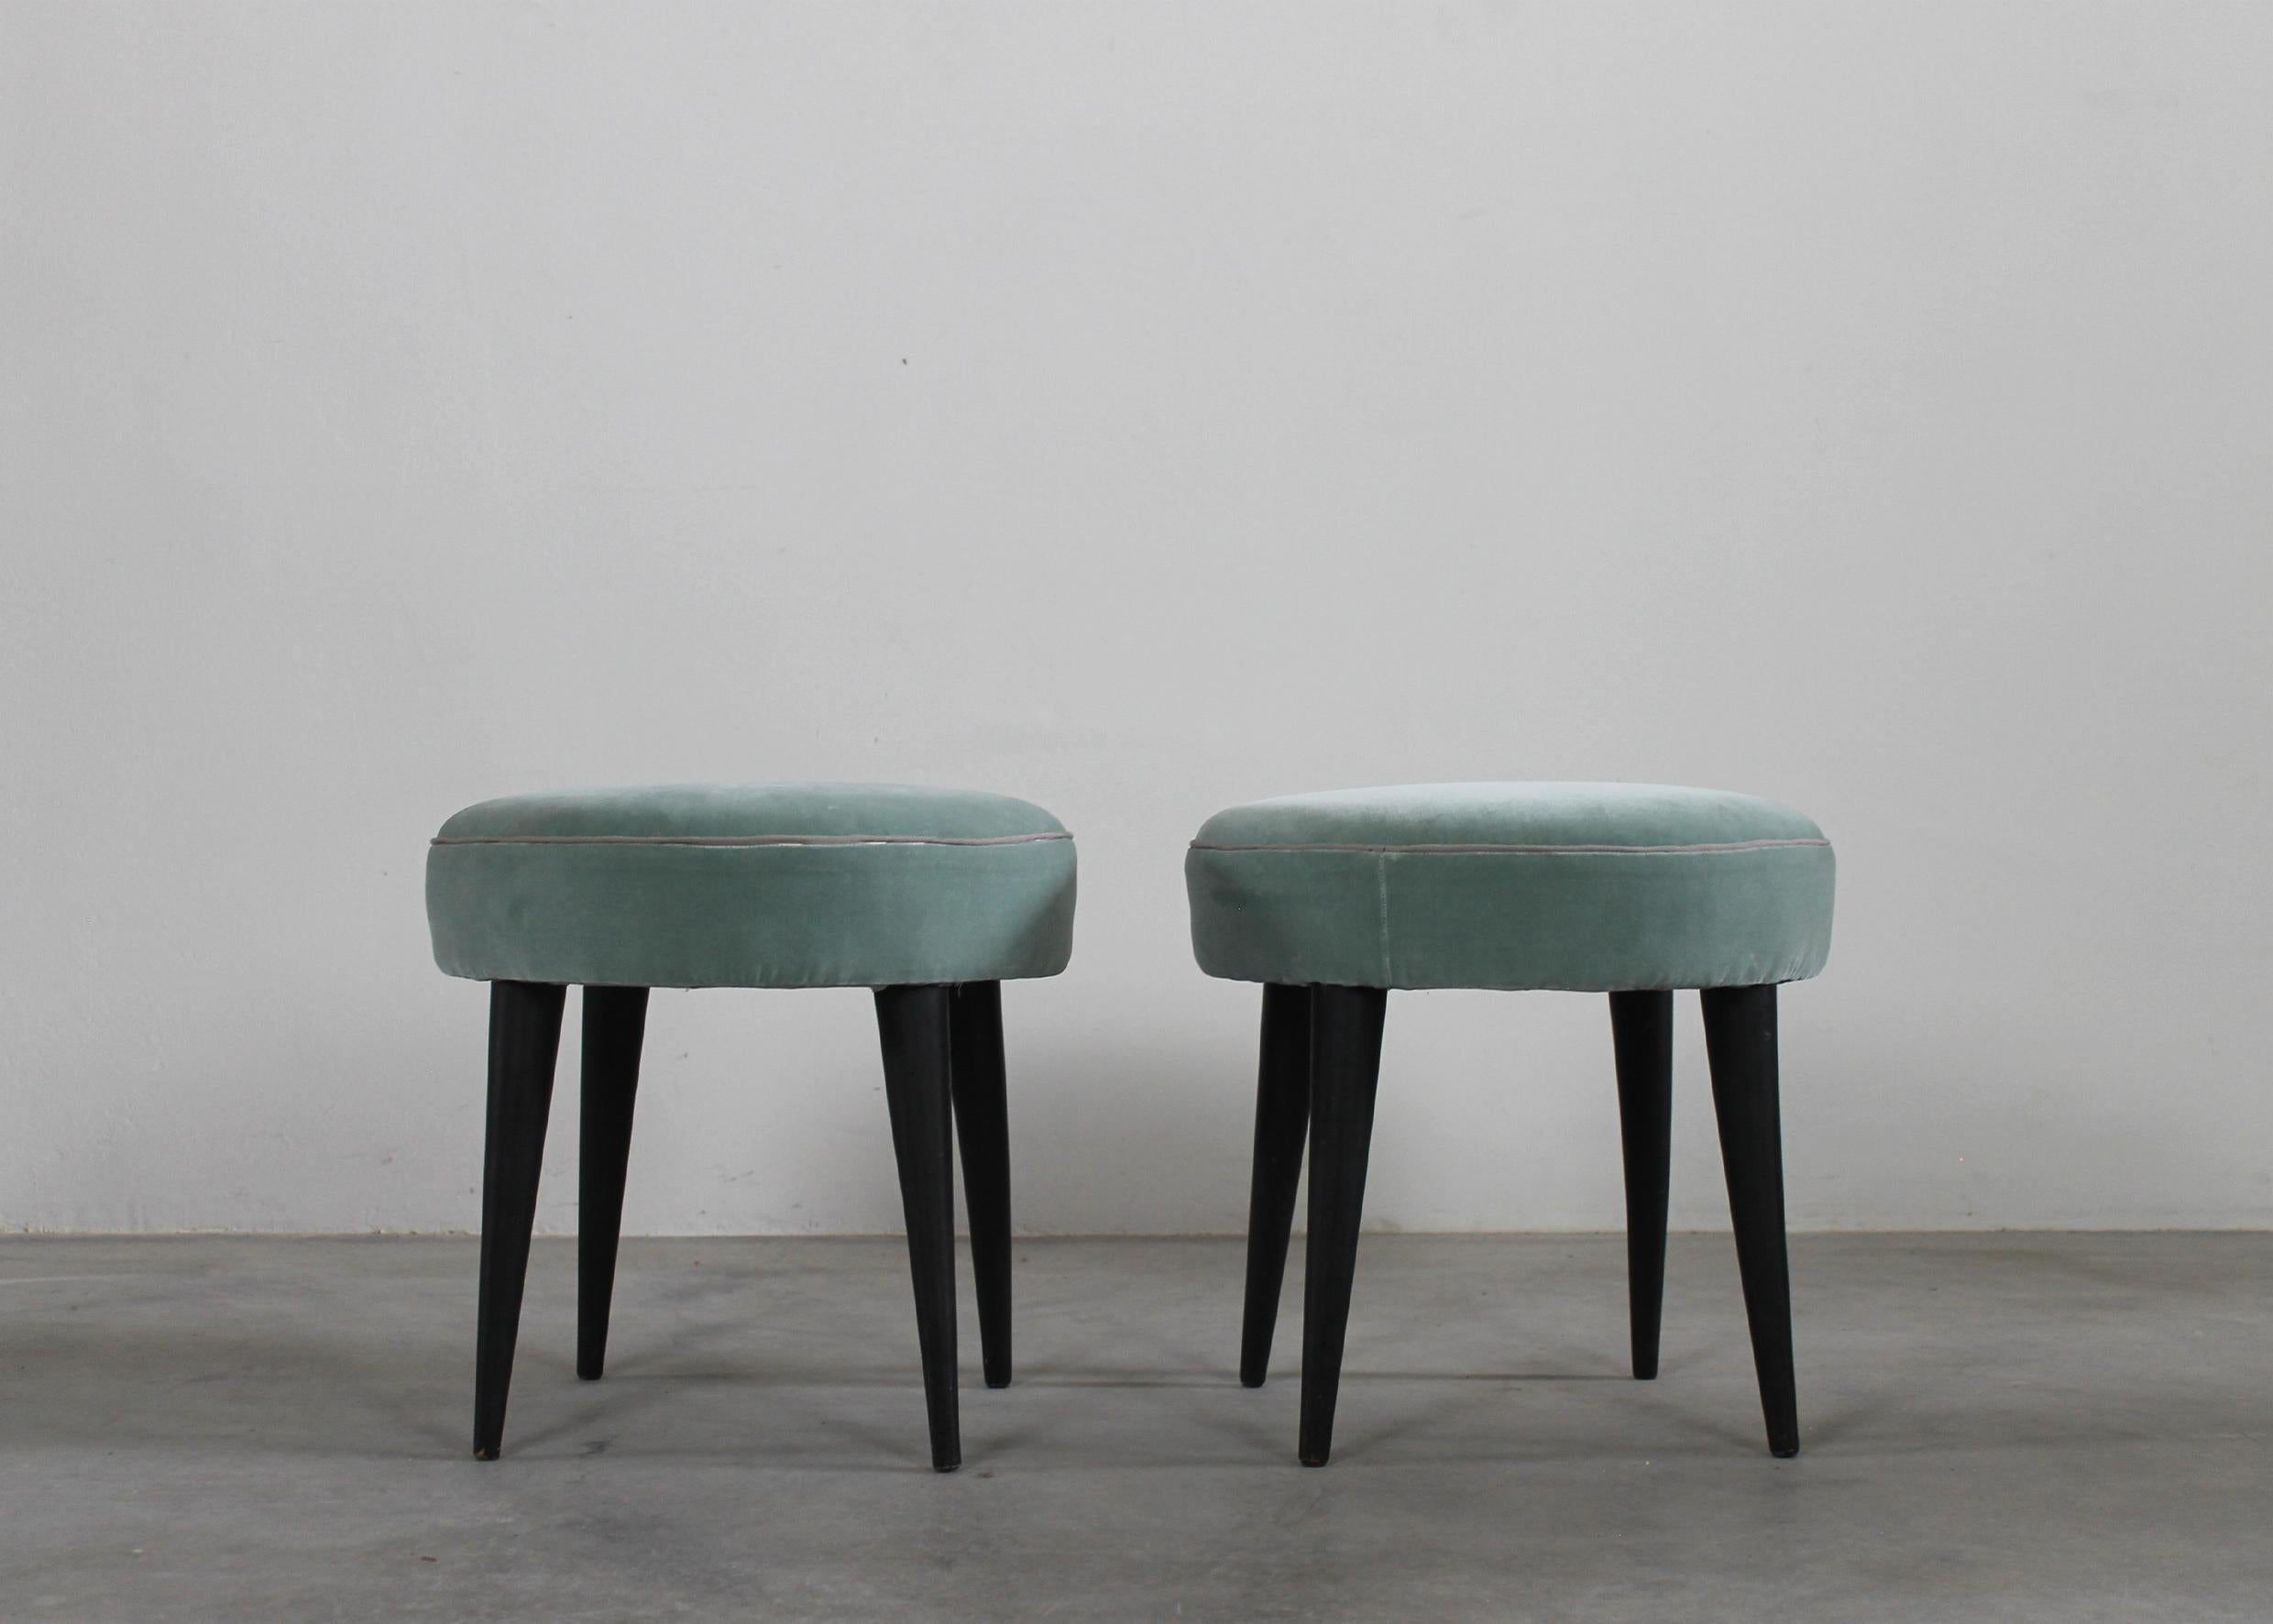 Mid-Century Modern Gio Ponti Set of Two Stools in Black Lacquered Wood and Fabric 1950s Italy For Sale